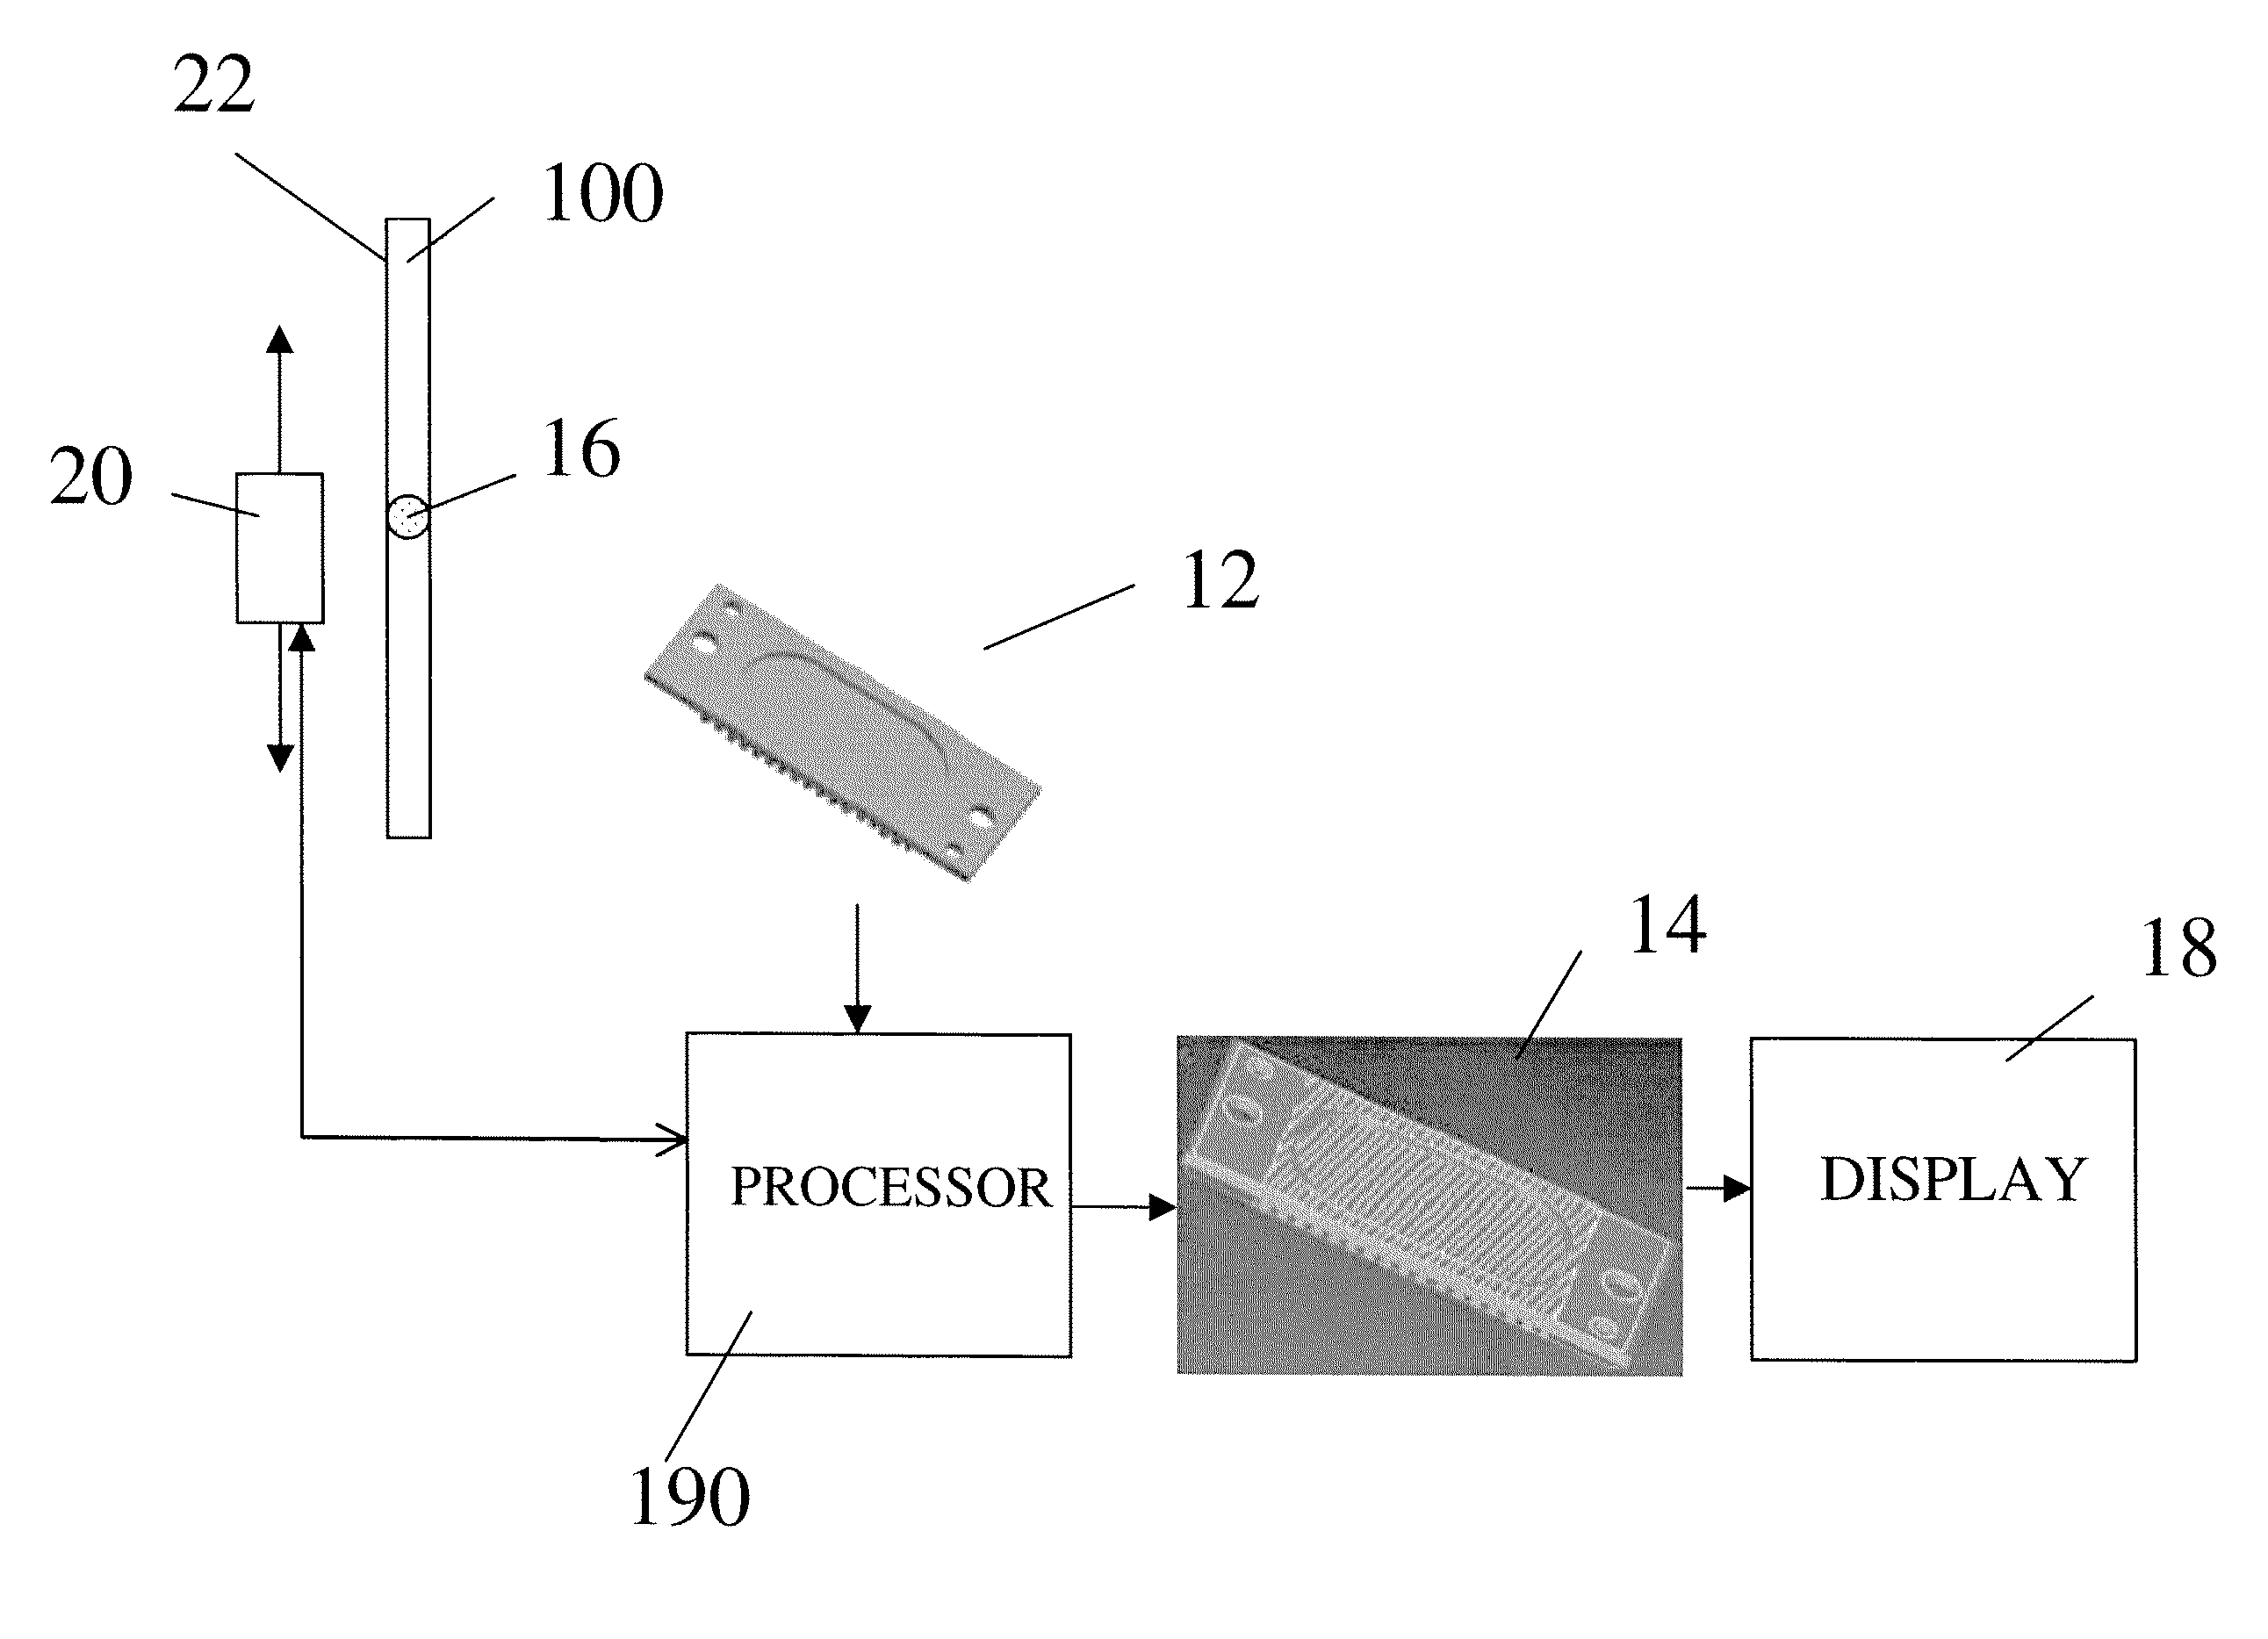 Multi-modality inspection method with data validation and data fusion